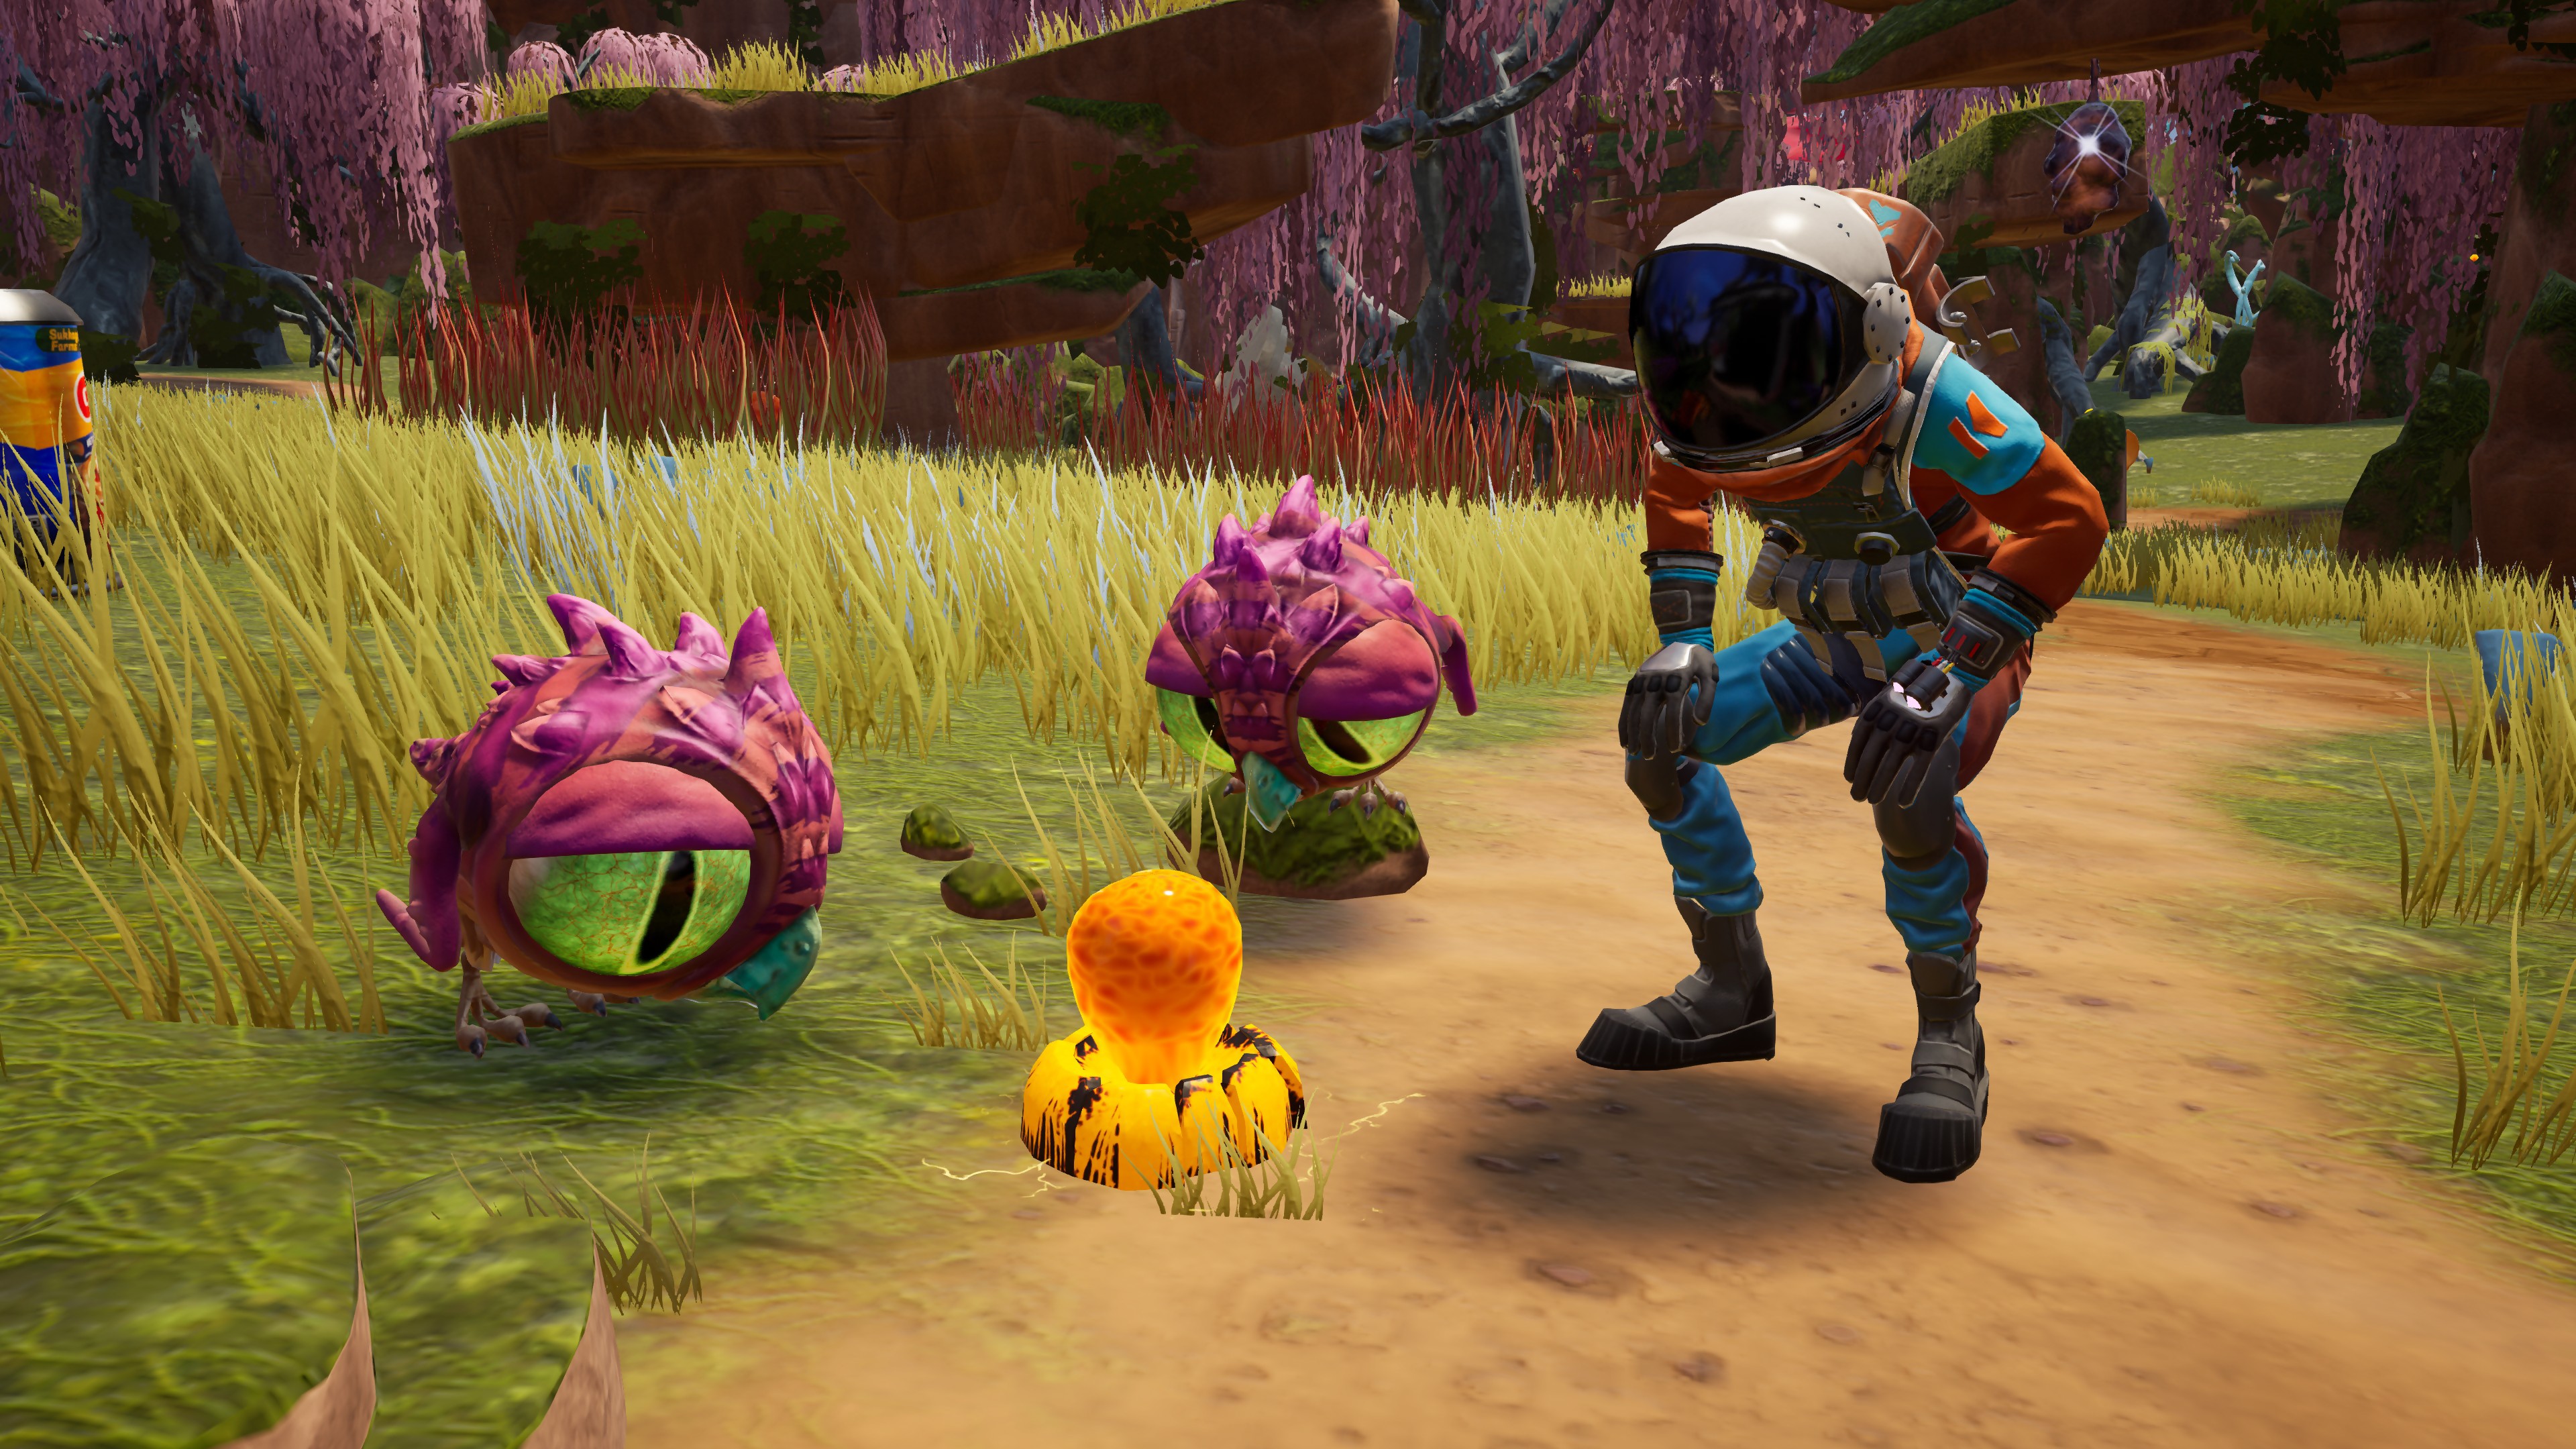 journey to the savage planet release date